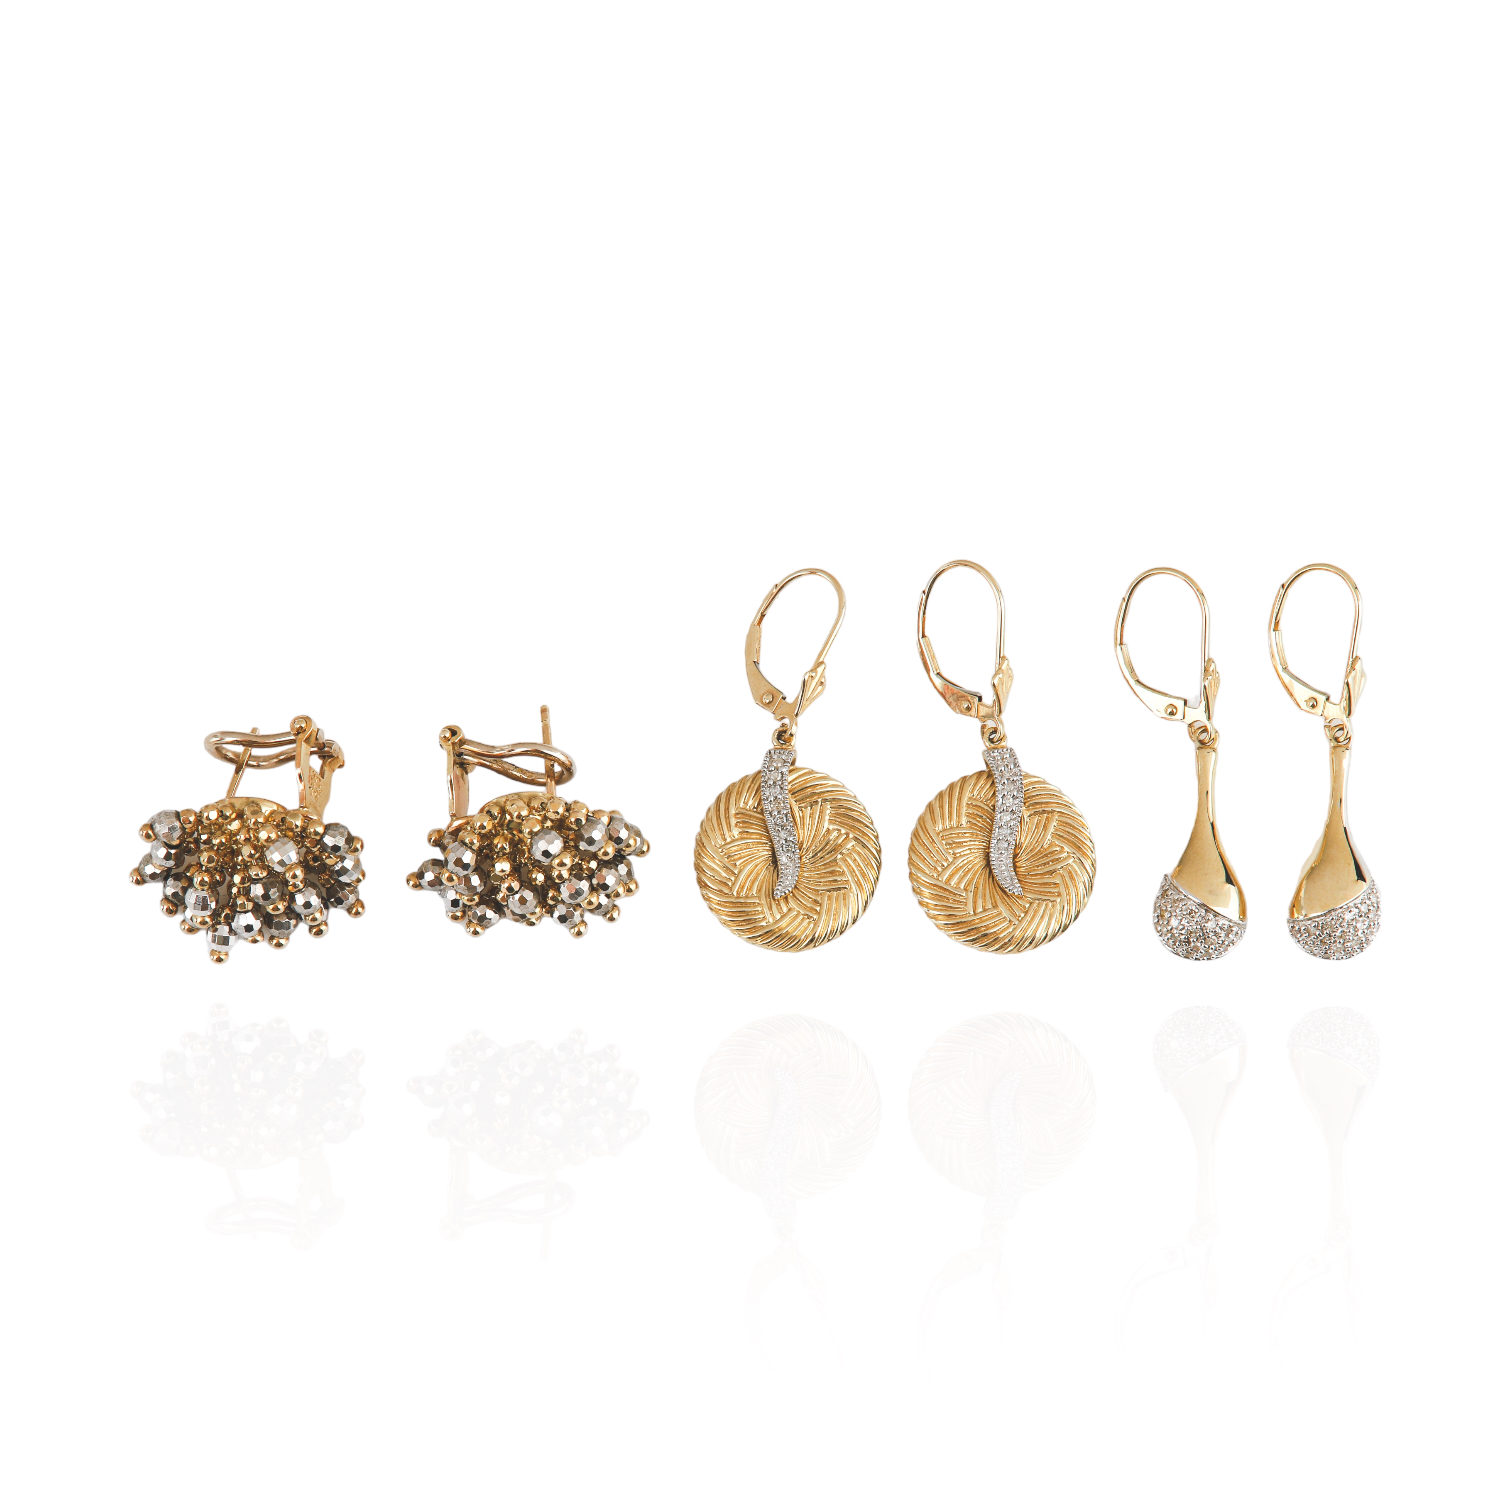  3 Pairs 14K gold earrings to 3b3a03